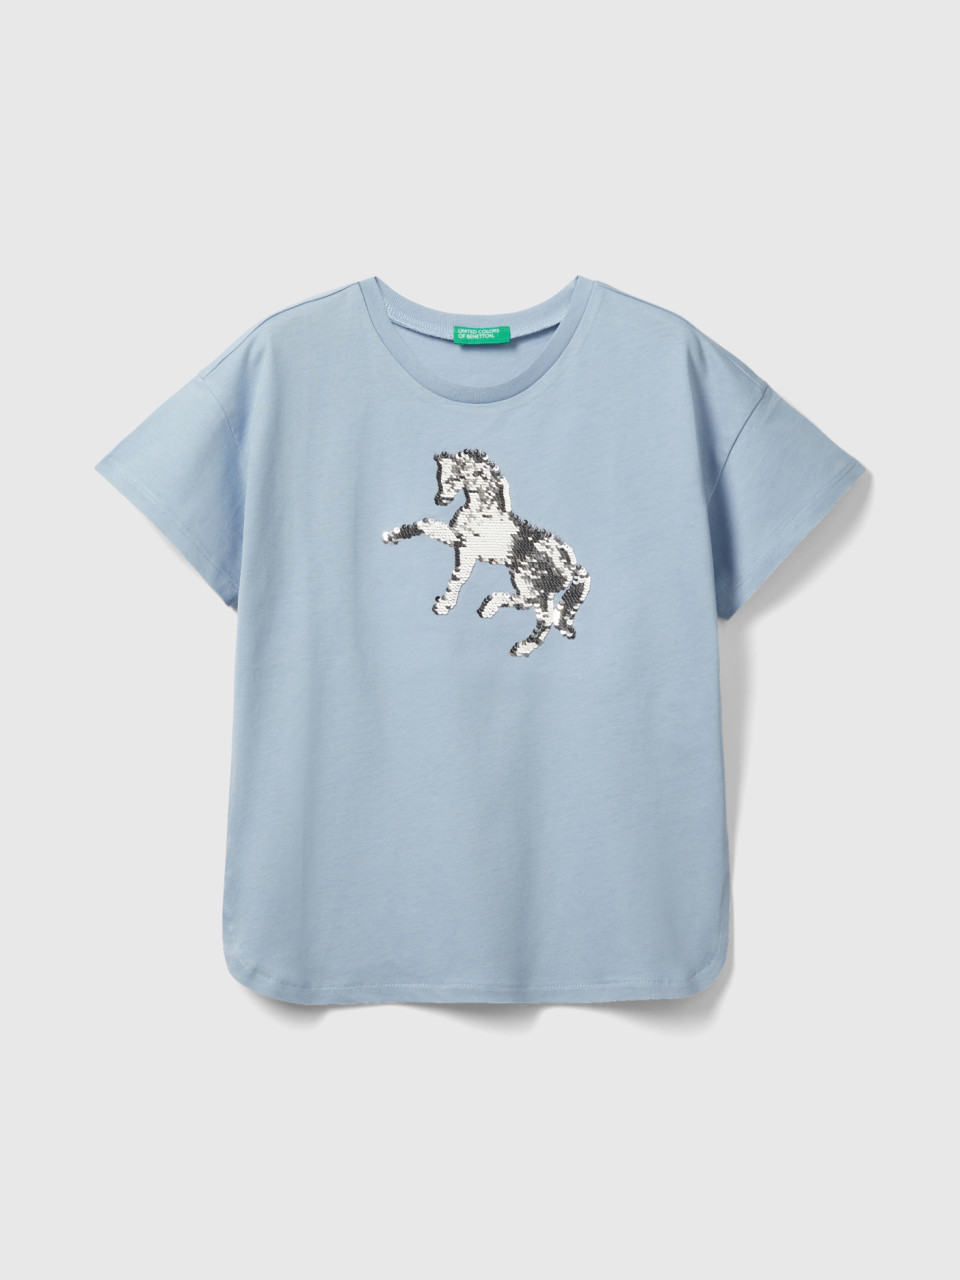 Benetton, T-shirt With Reversible Sequins, Sky Blue, Kids